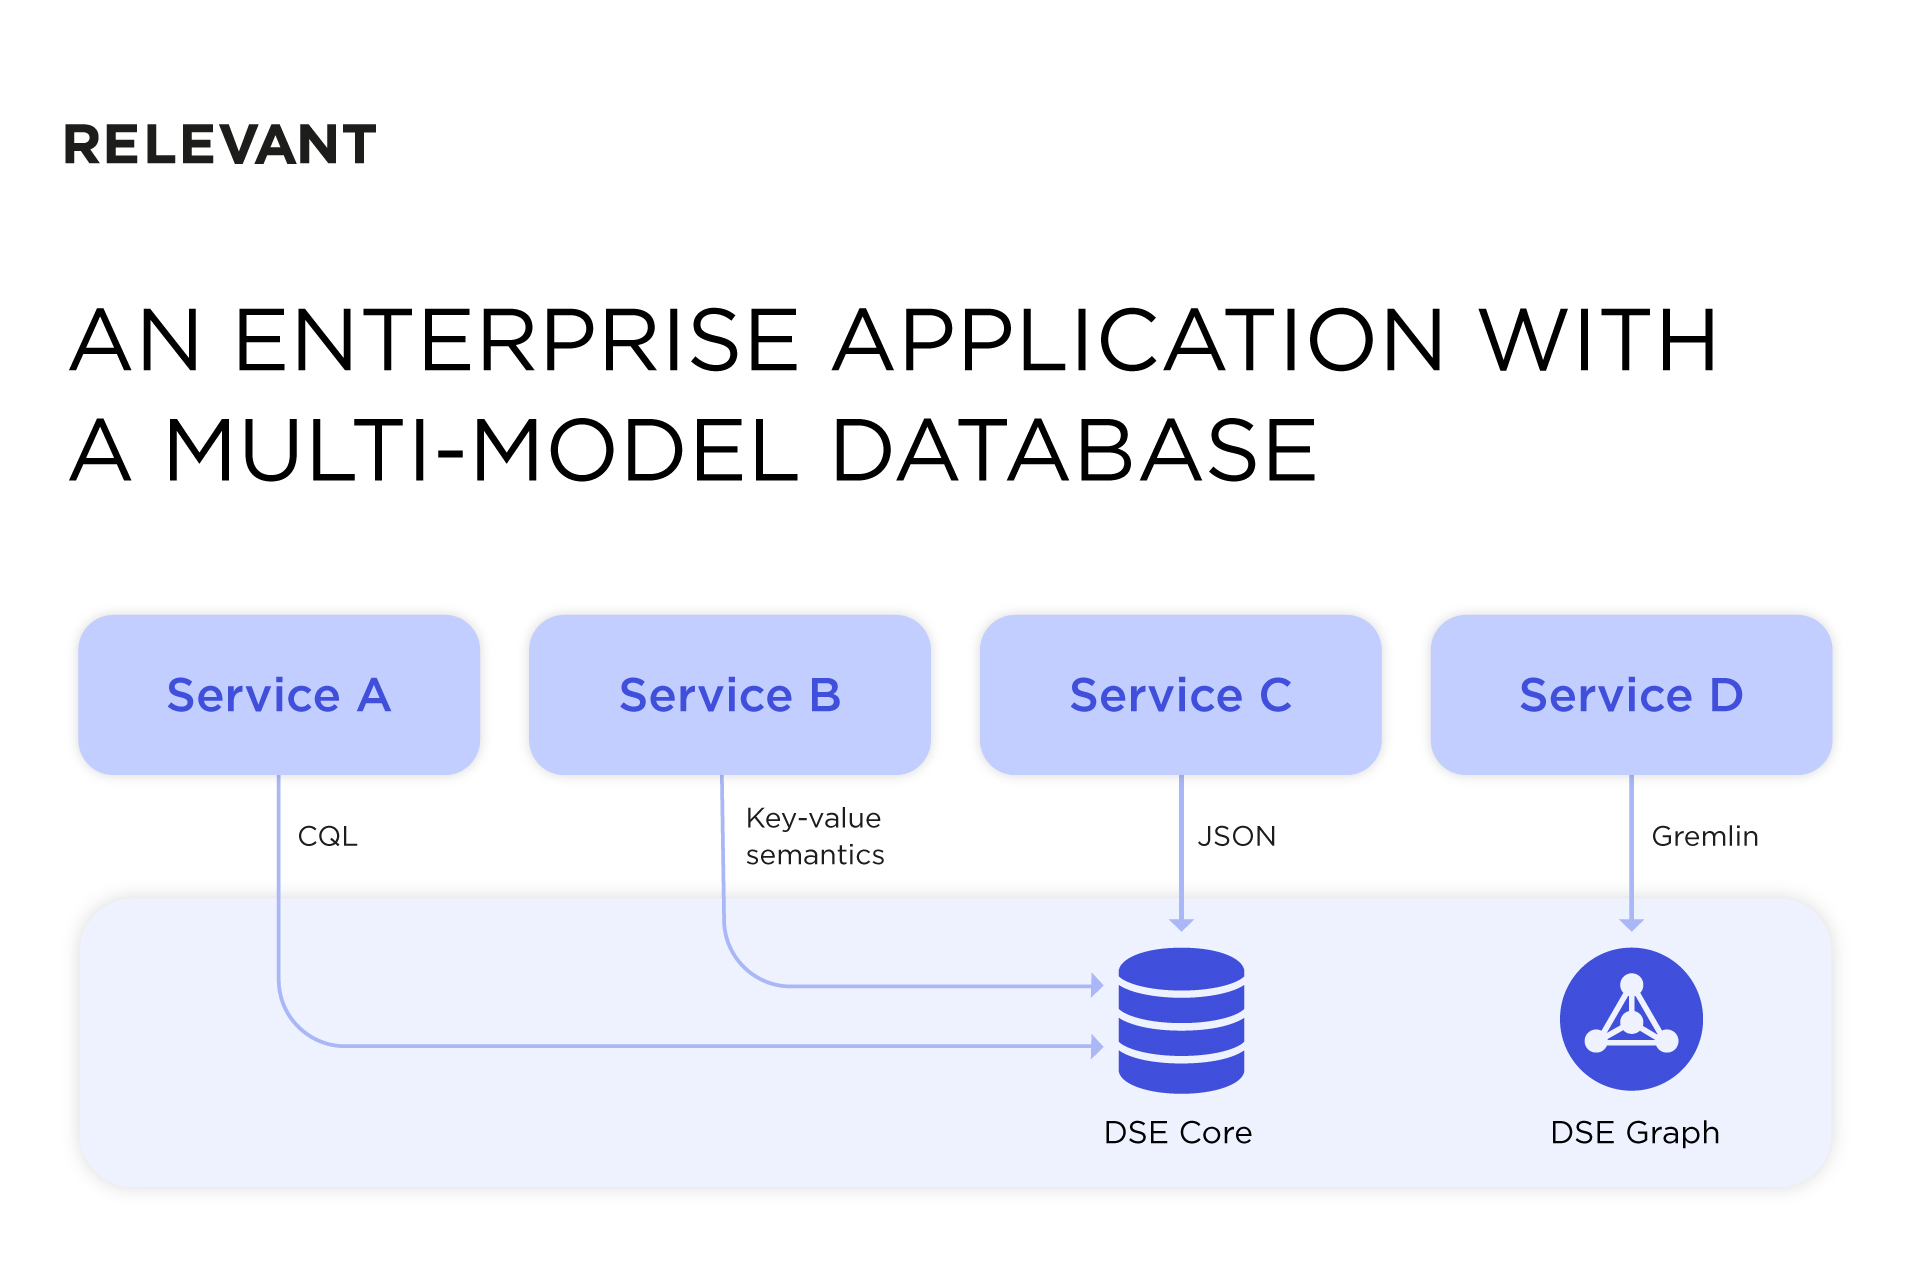 Enterprise application with a multi-model database architecture pattern